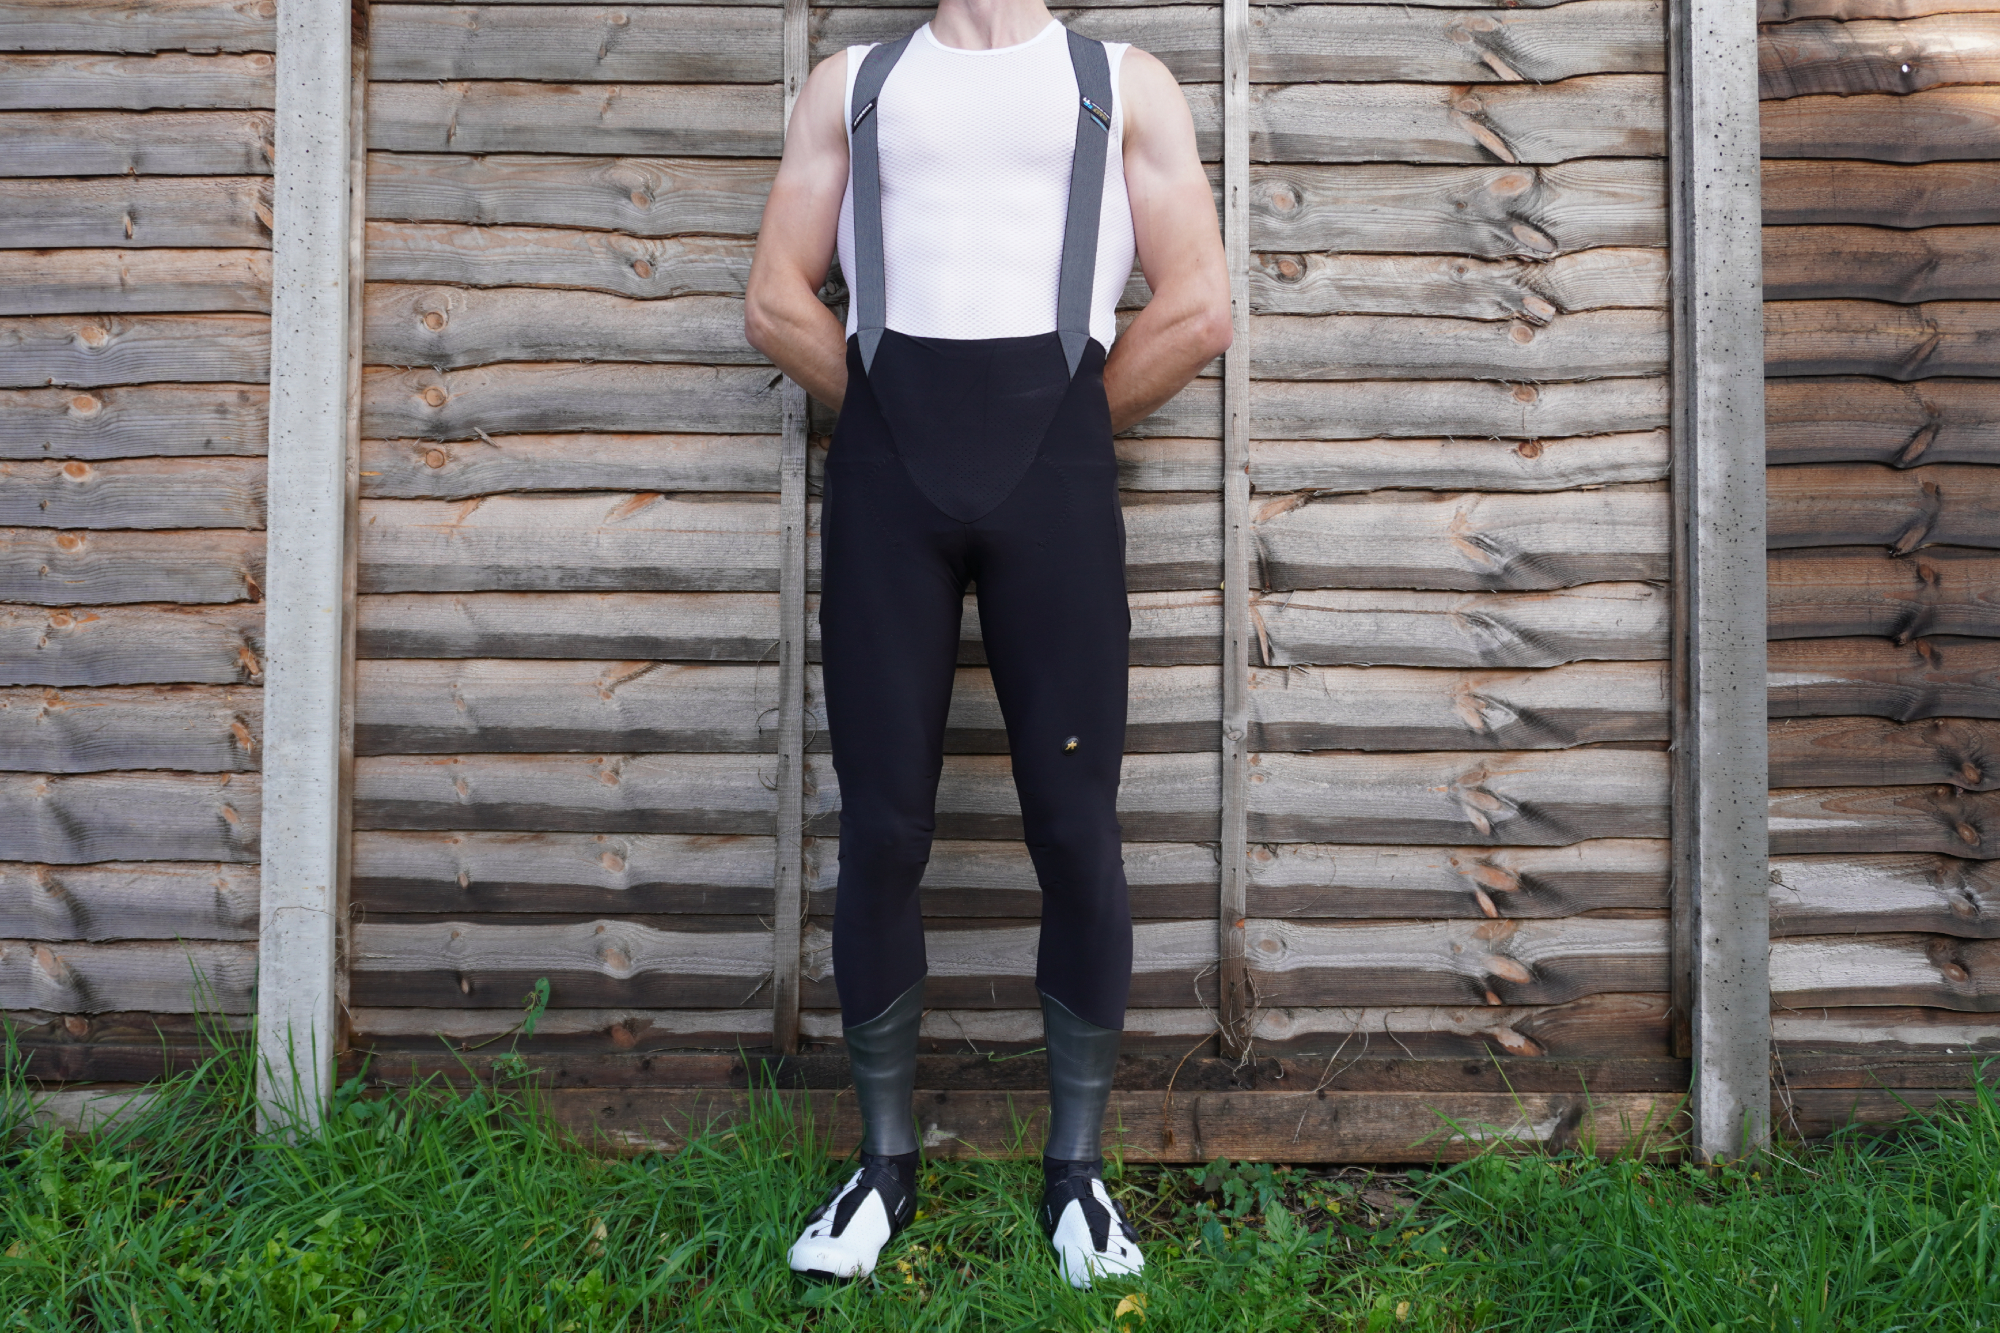 Image shows a rider wearing the Assos Mille GTO Winter Bib Tights C2